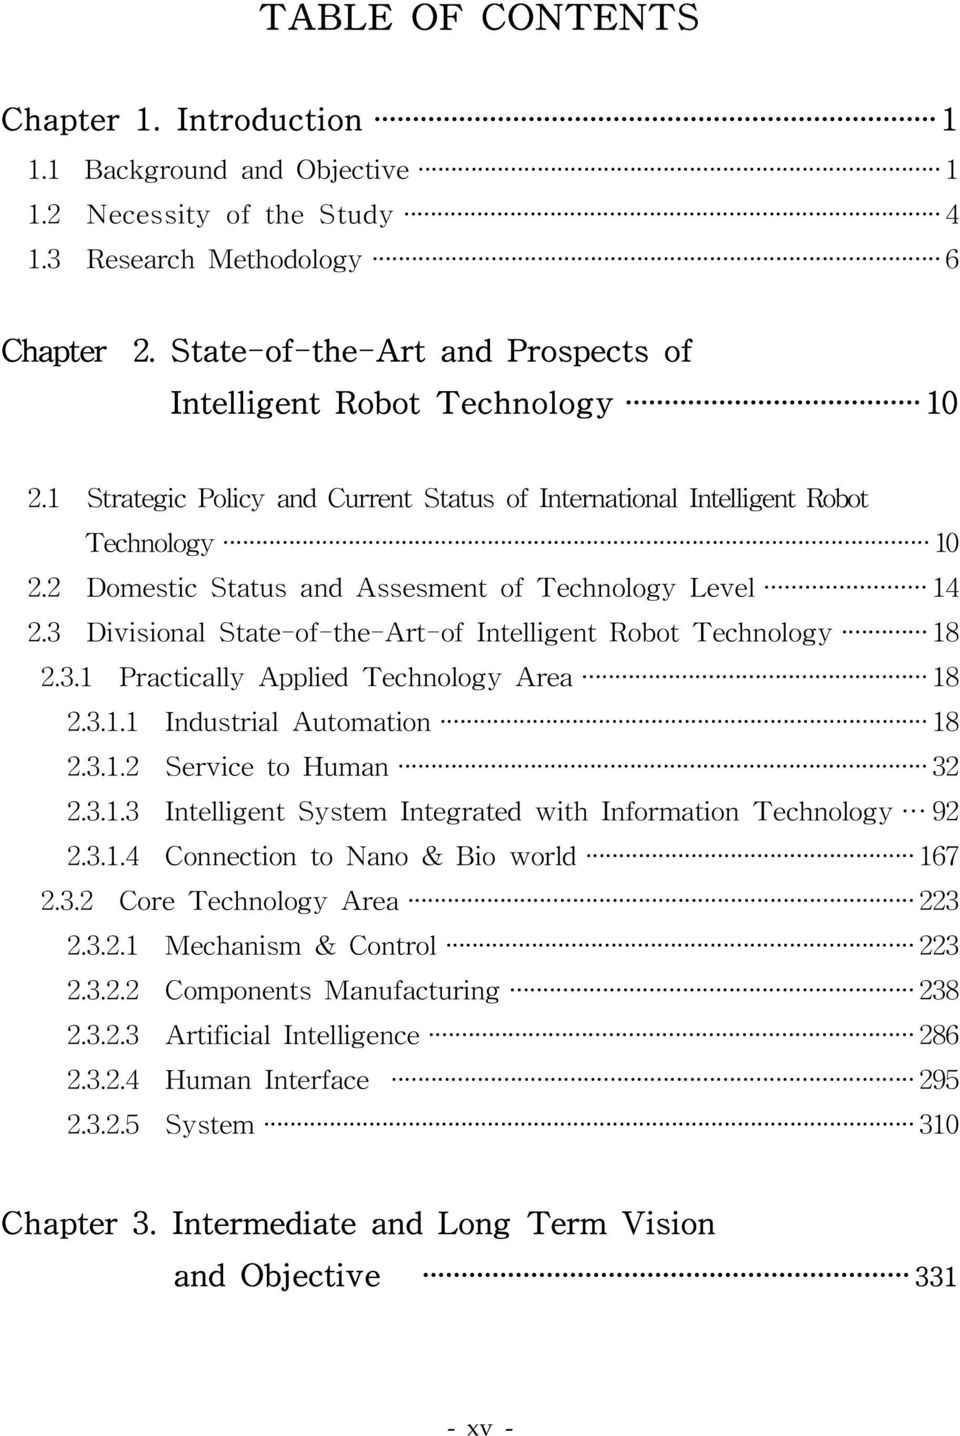 2 D o m e s t i c S t a t u s a n d A s s e s m e n t o f T e c h n o l o g y L e v e l 1 4 2. 3 D ivis ional State-of- the-art- of Intelligent Robot Technolo g y 1 8 2.3.1 Practically Applied Technology Area 1 8 2.